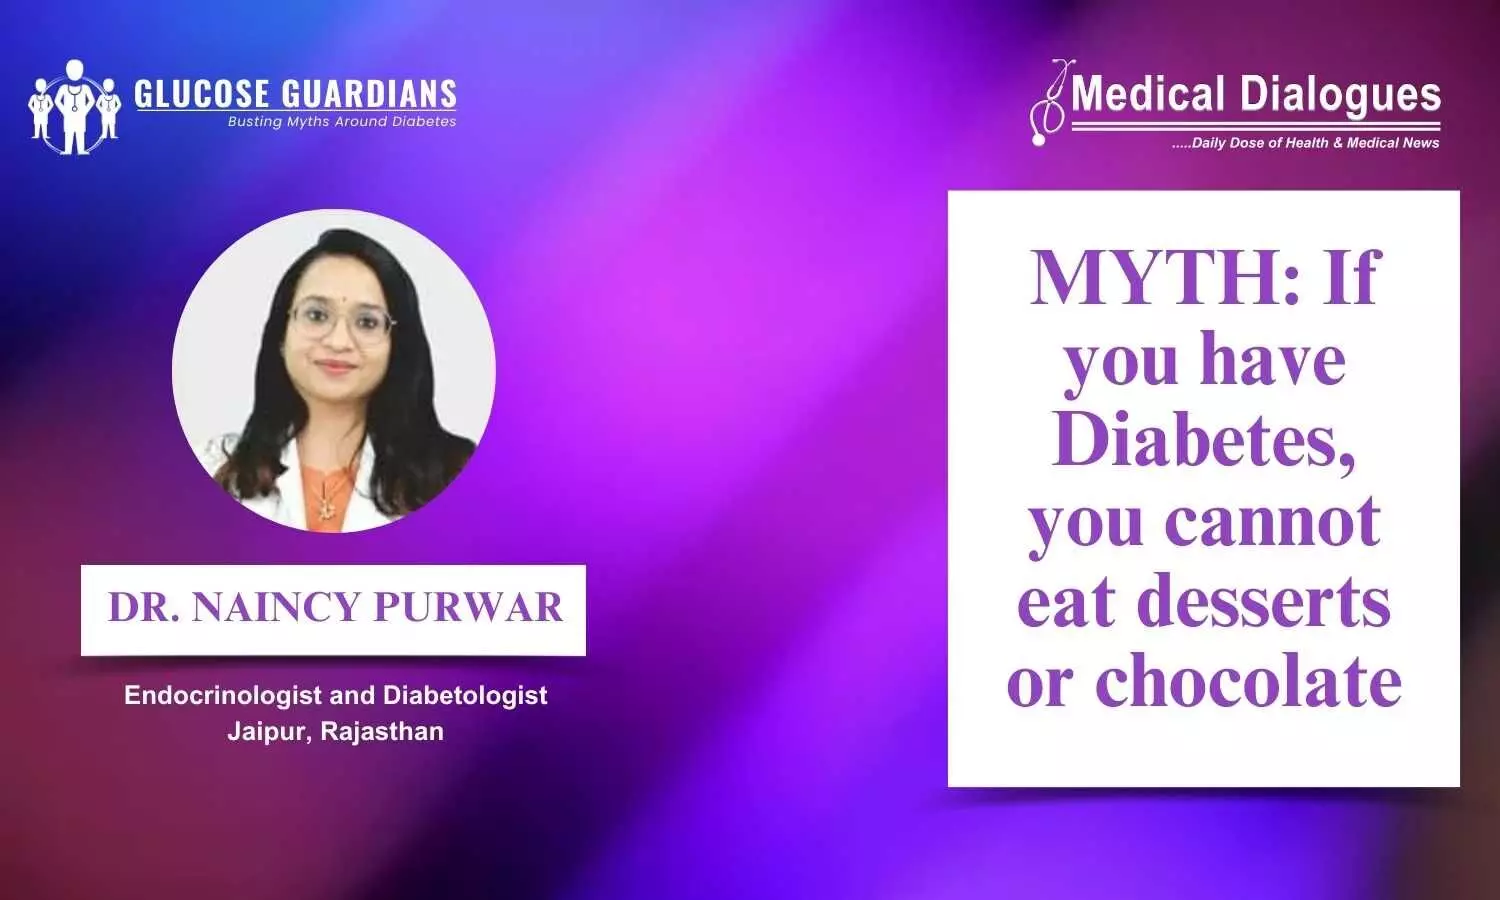 Myths related to Diabetes and eating chocolates - Dr Nancy Purwar